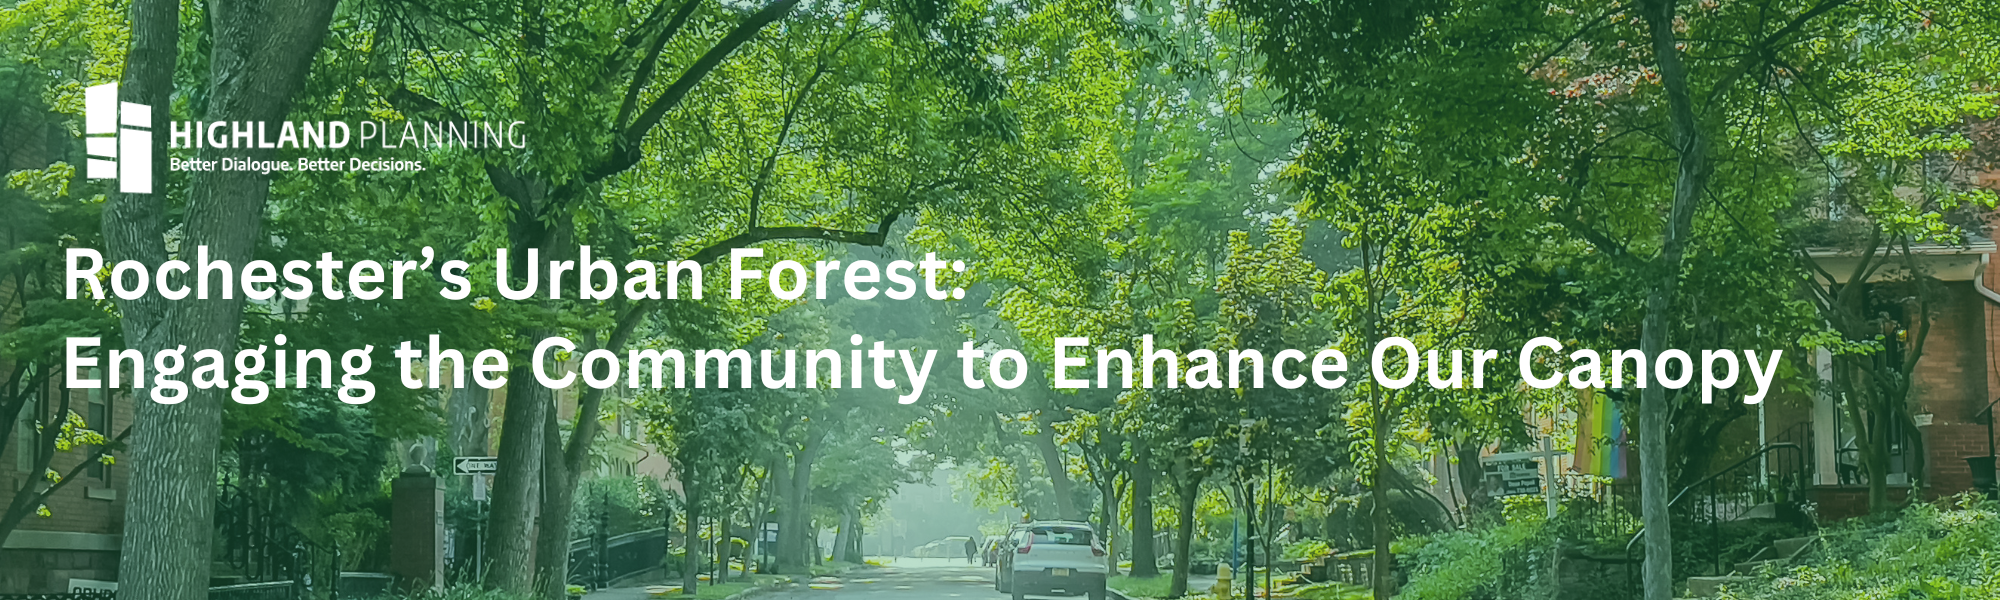 Rochester’s Urban Forest: Engaging the Community to Enhance Our Canopy